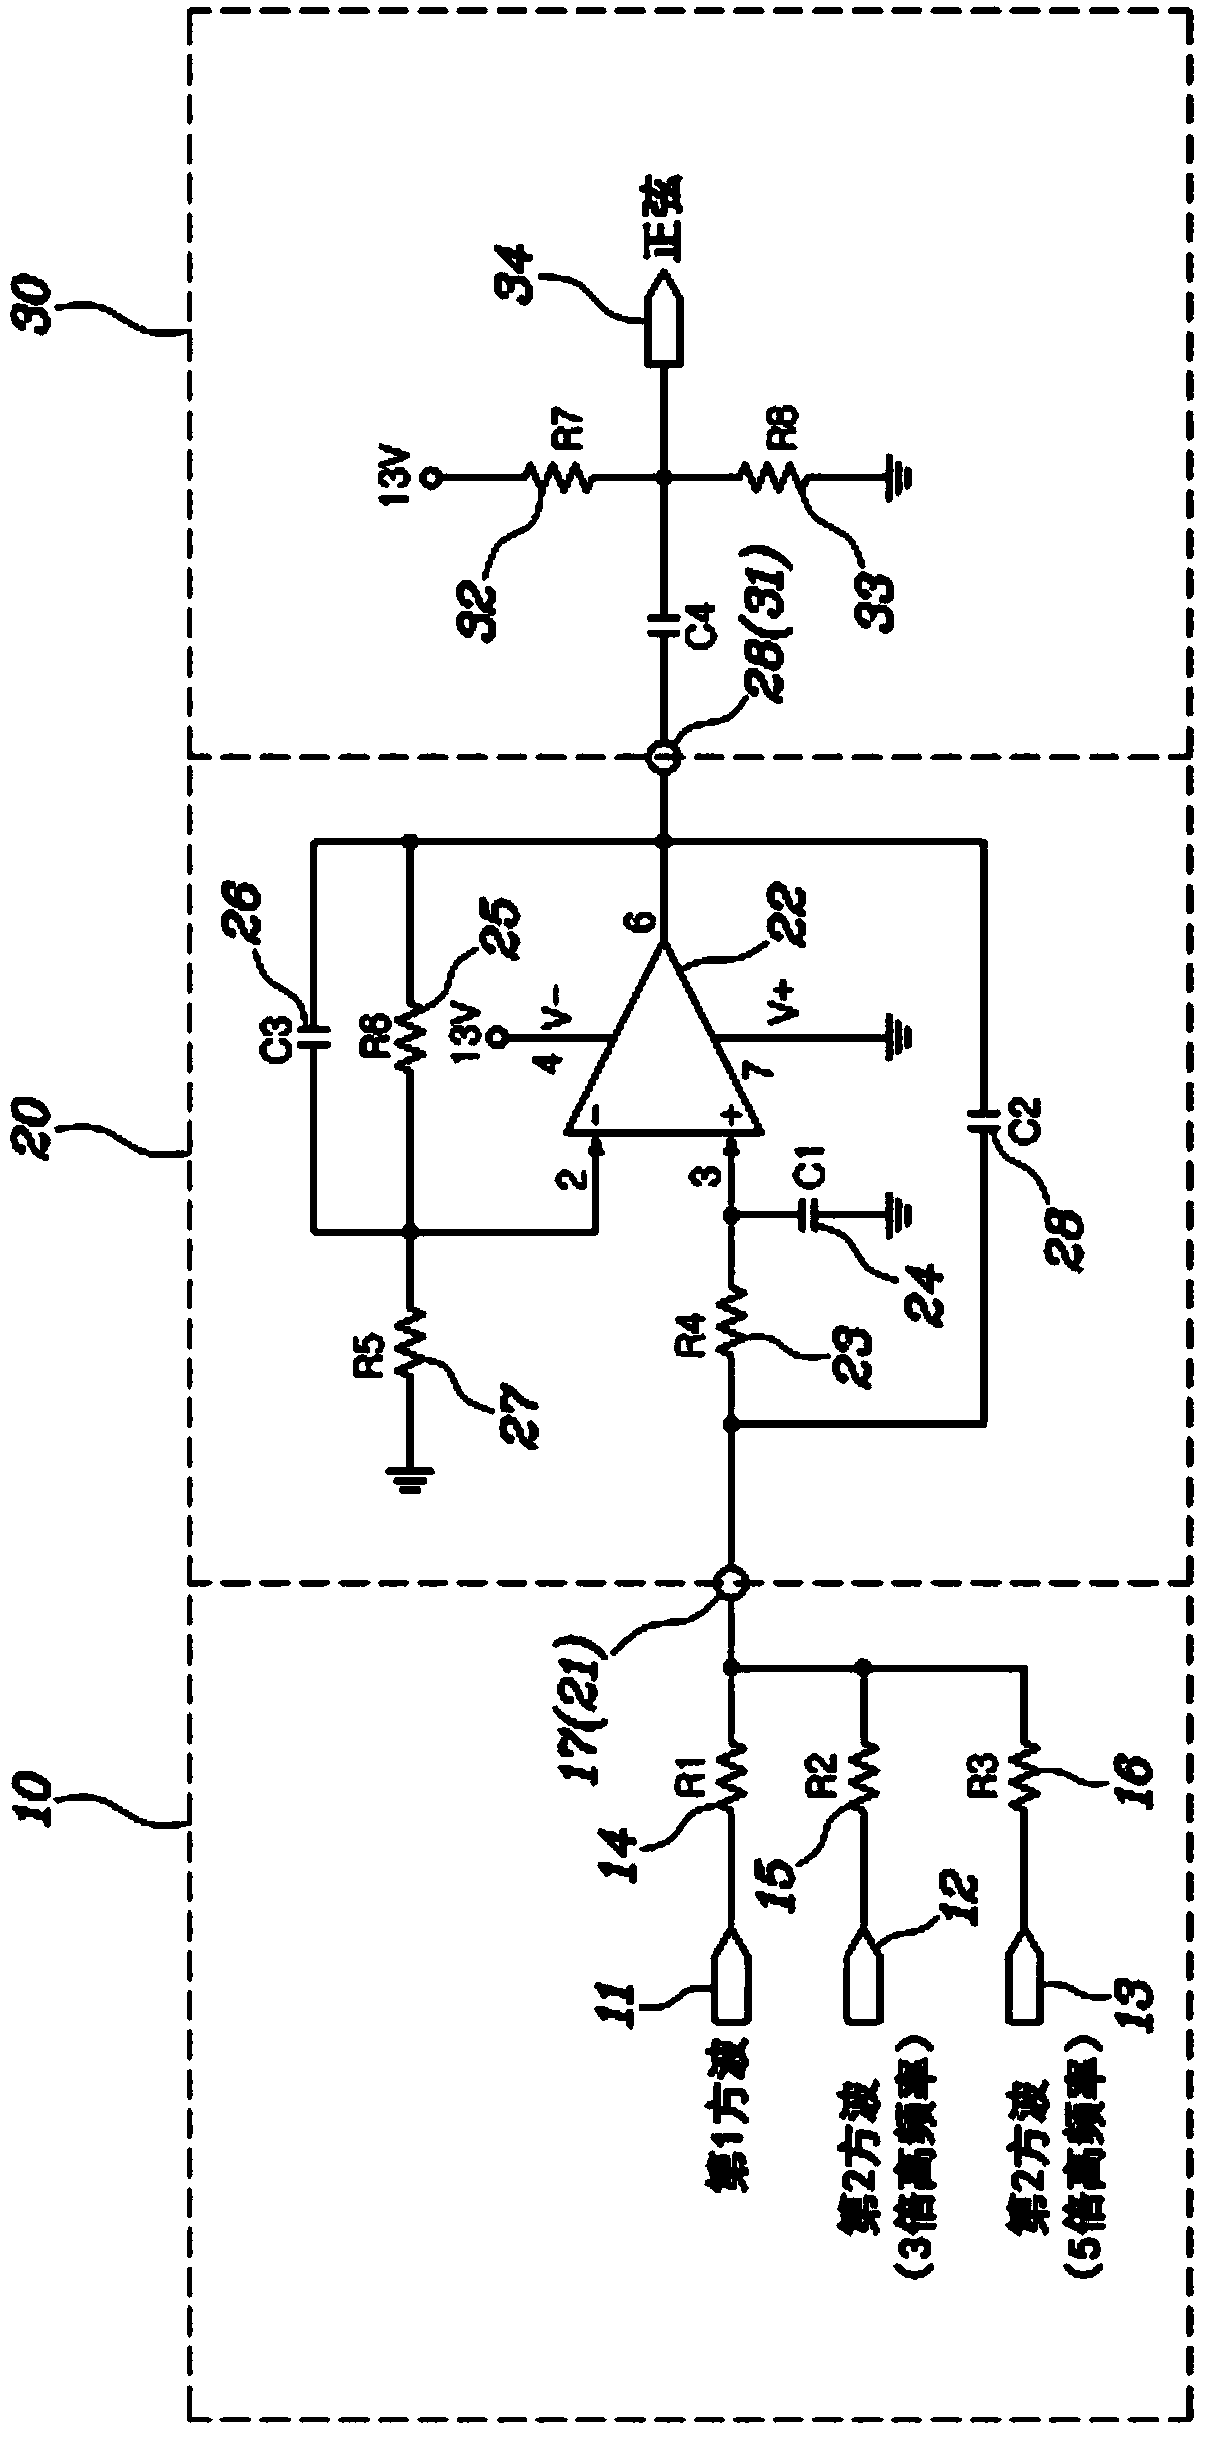 Apparatus and method for generating sine wave